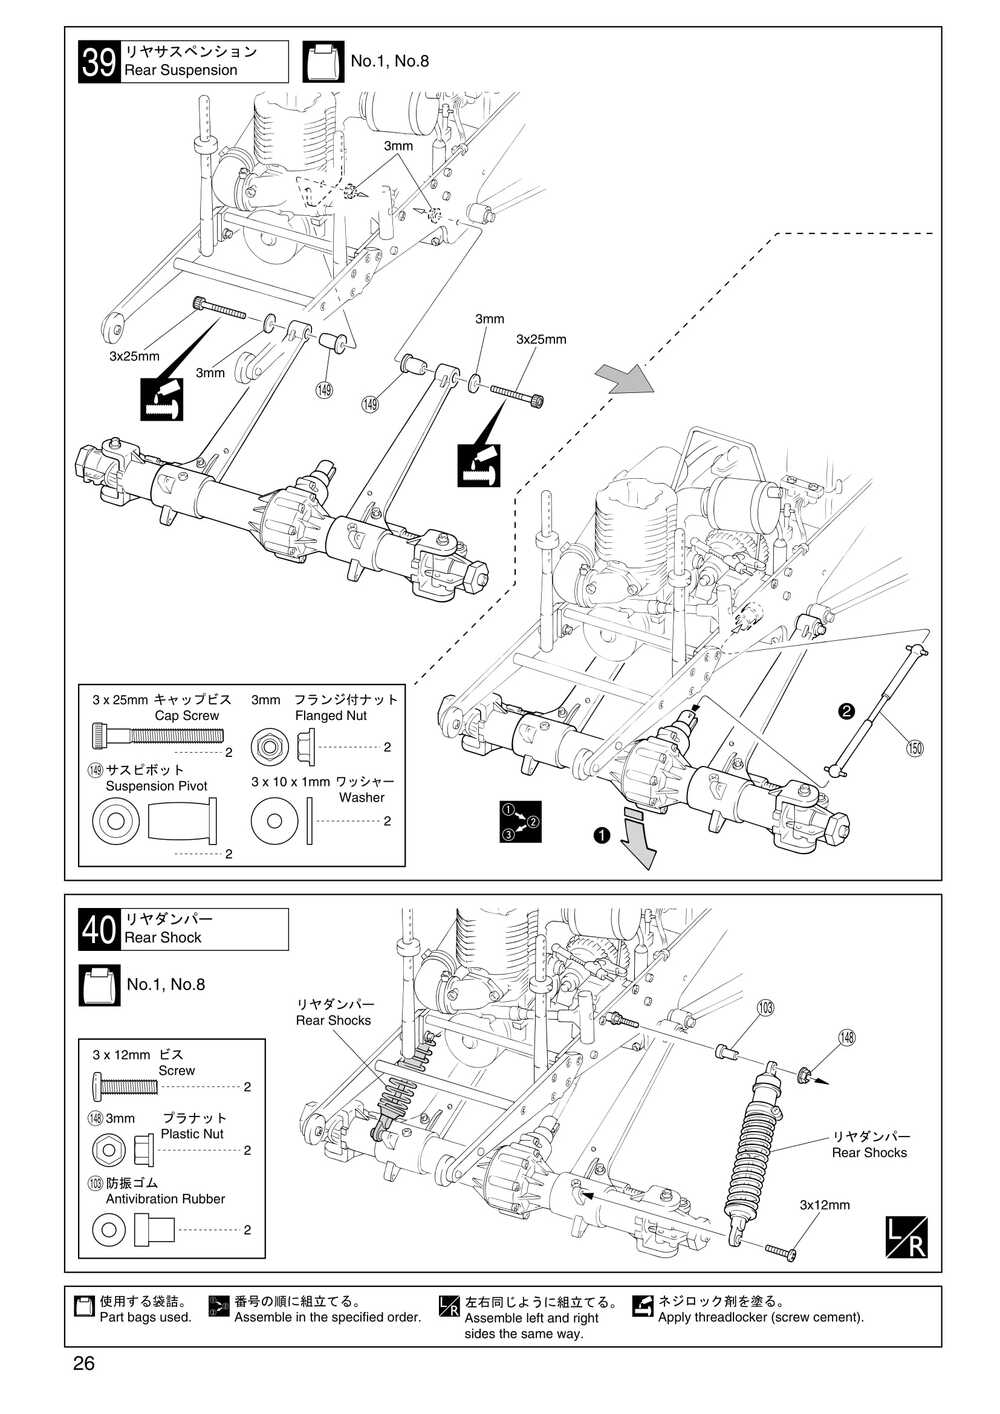 Kyosho - 31221 - Mad-Force - Manual - Page 26